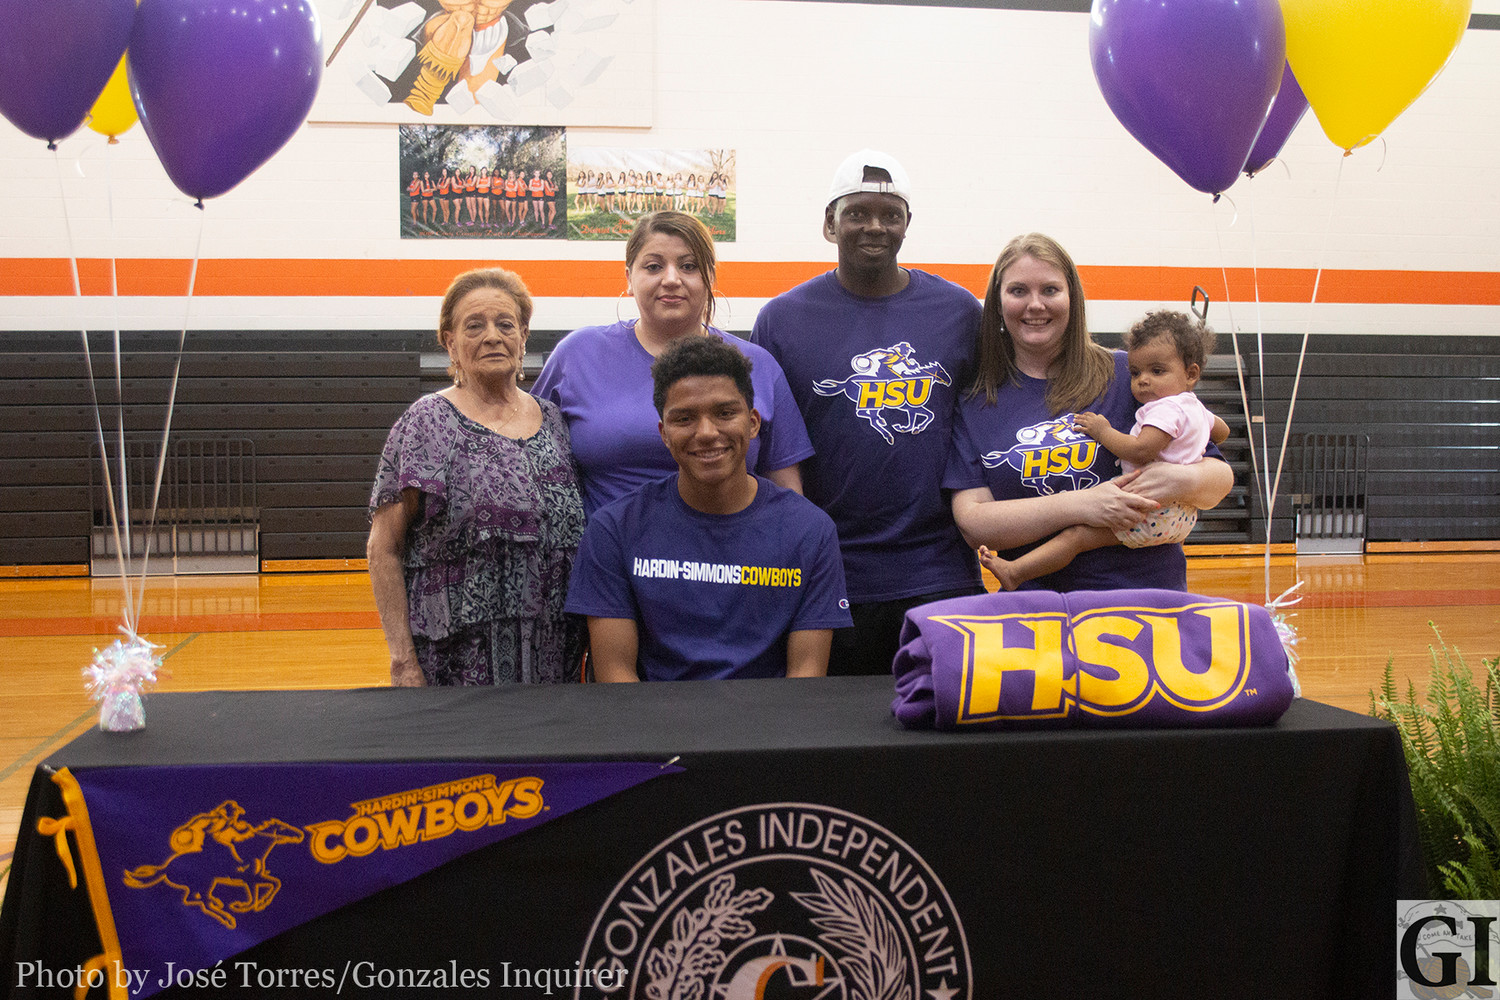 Juan Jordan officially signed with Hardin-Simmons University to compete for their track and field team this upcoming year.